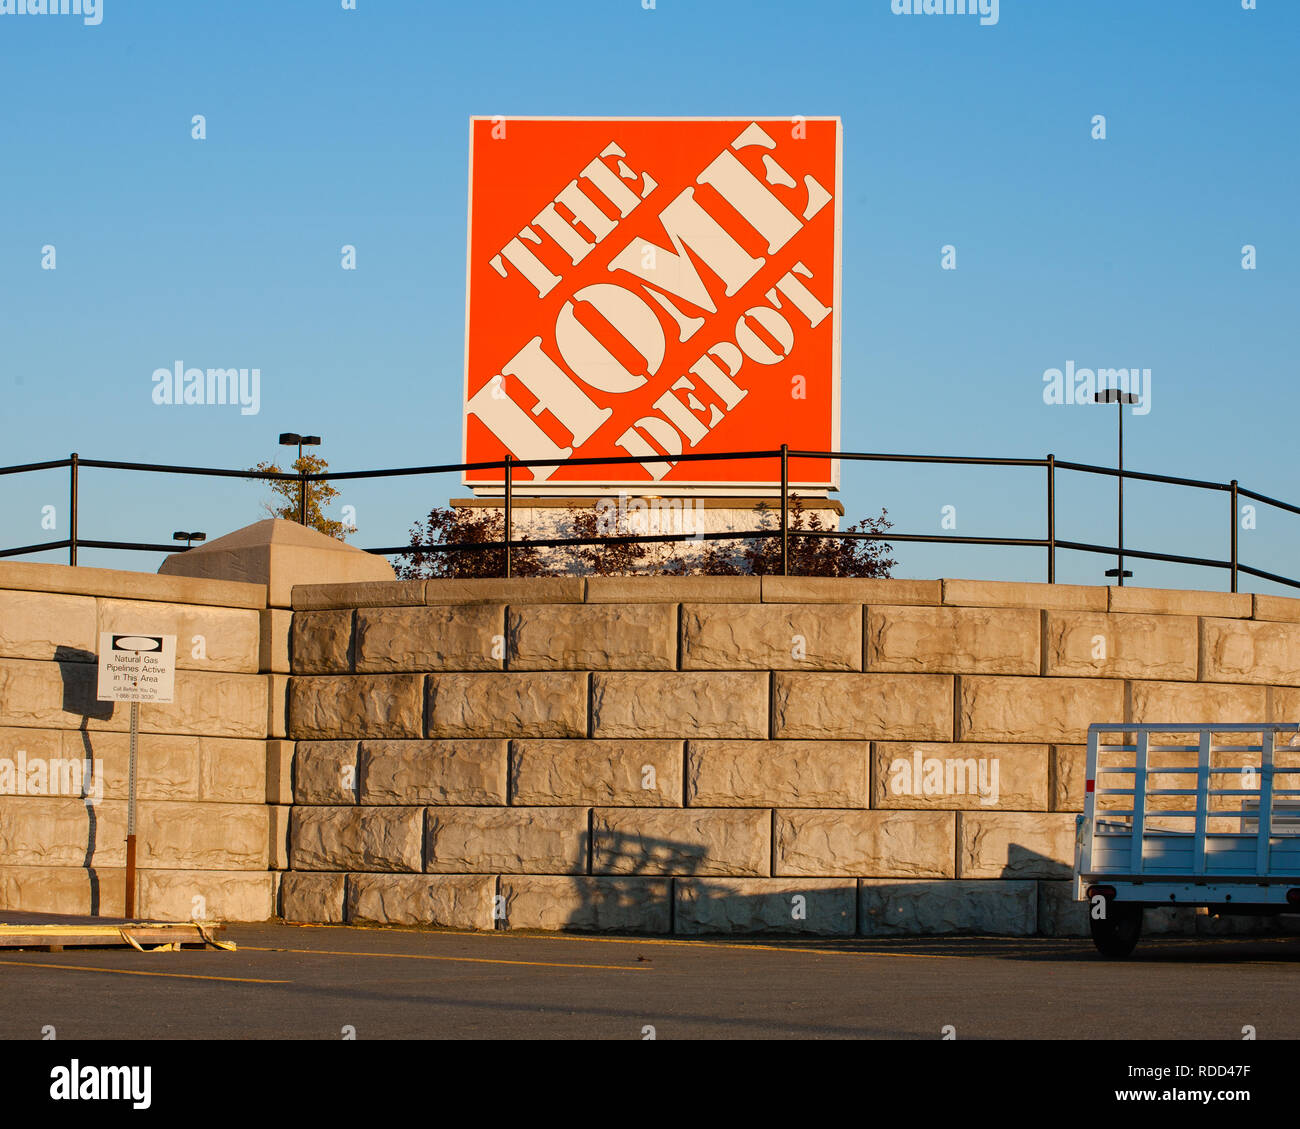 Dartmouth, Canada - September 28, 2014: Home Depot store sign. The Home Depot is a home improvement retailer. It operates retail stores across the Uni Stock Photo